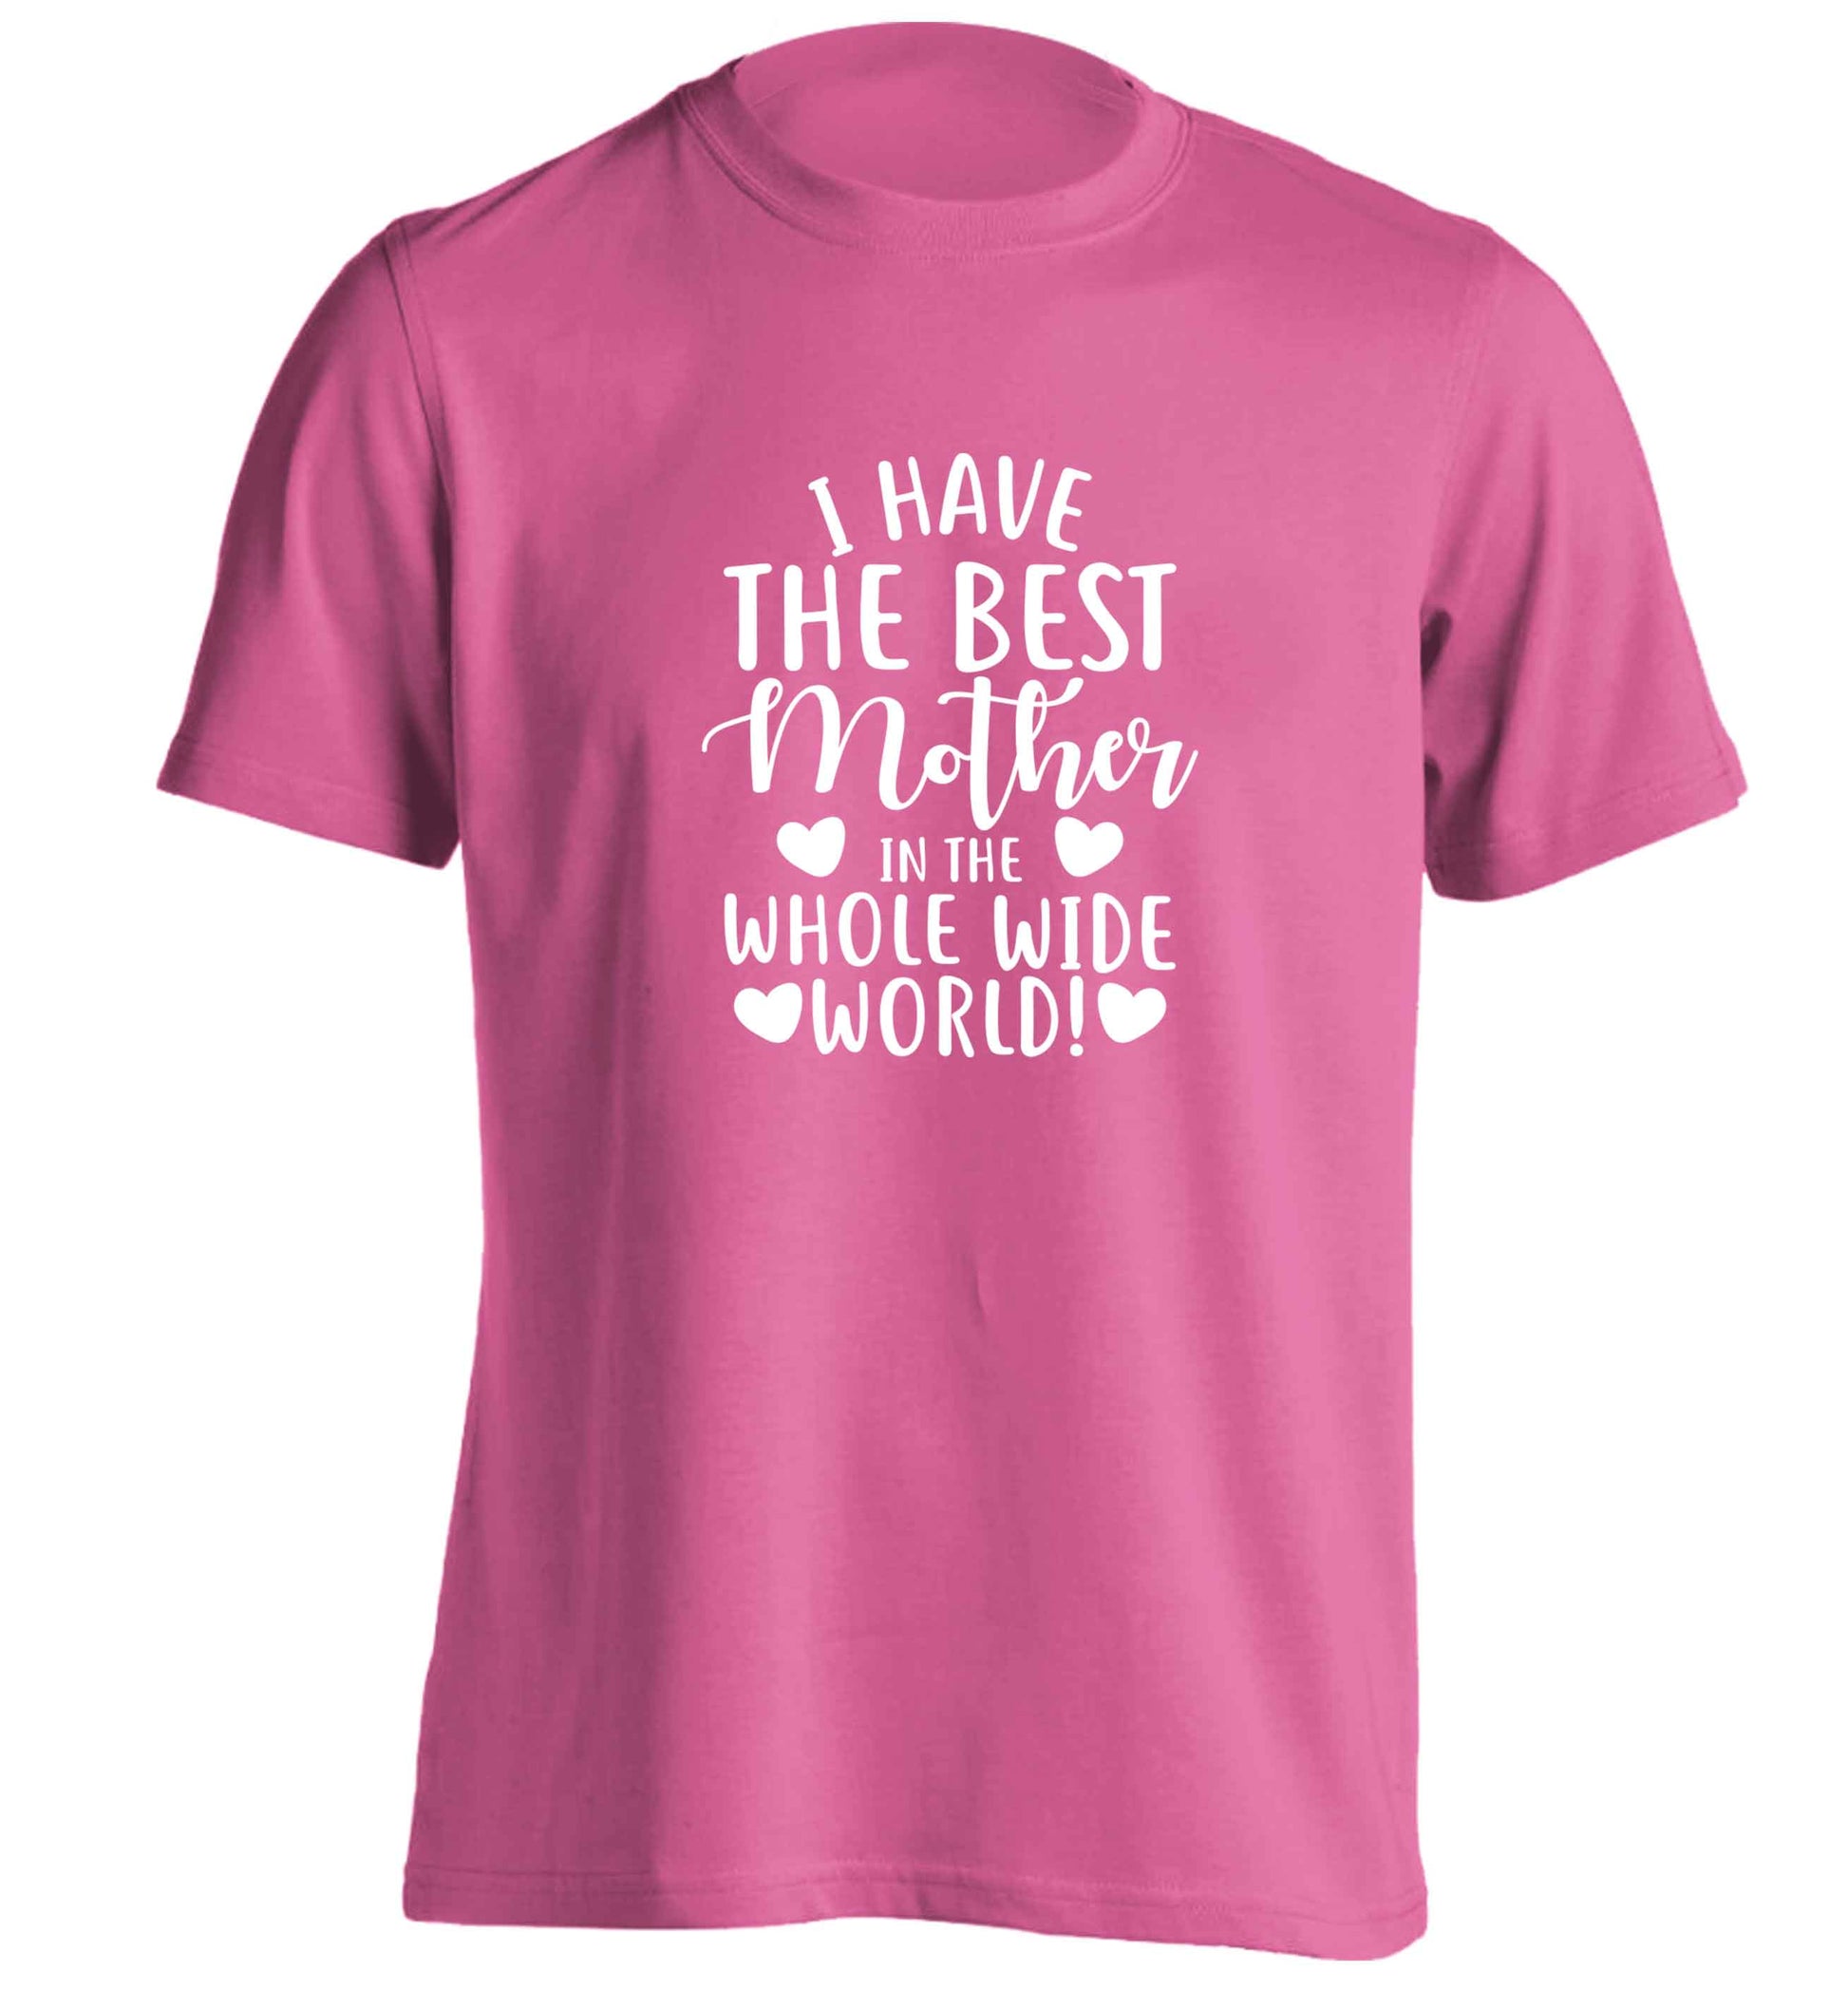 I have the best mother in the whole wide world adults unisex pink Tshirt 2XL